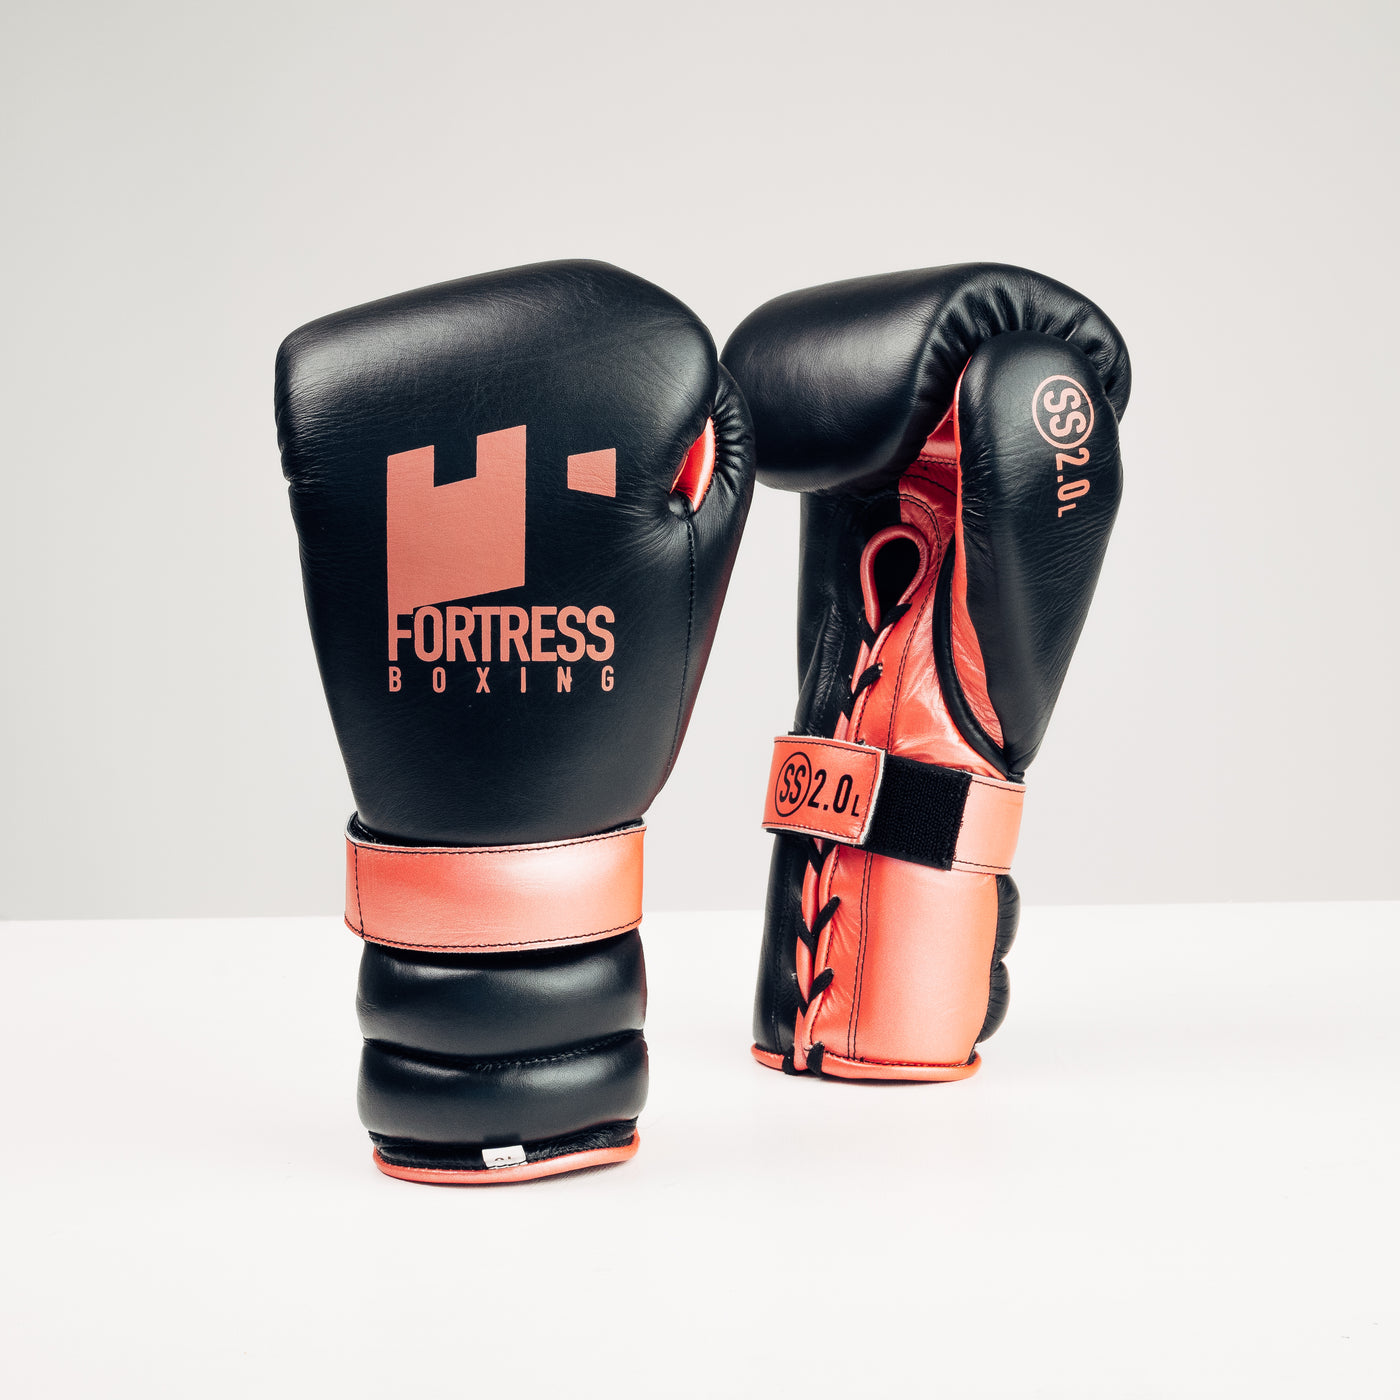 SS2.0 Lace Training / Sparring Gloves